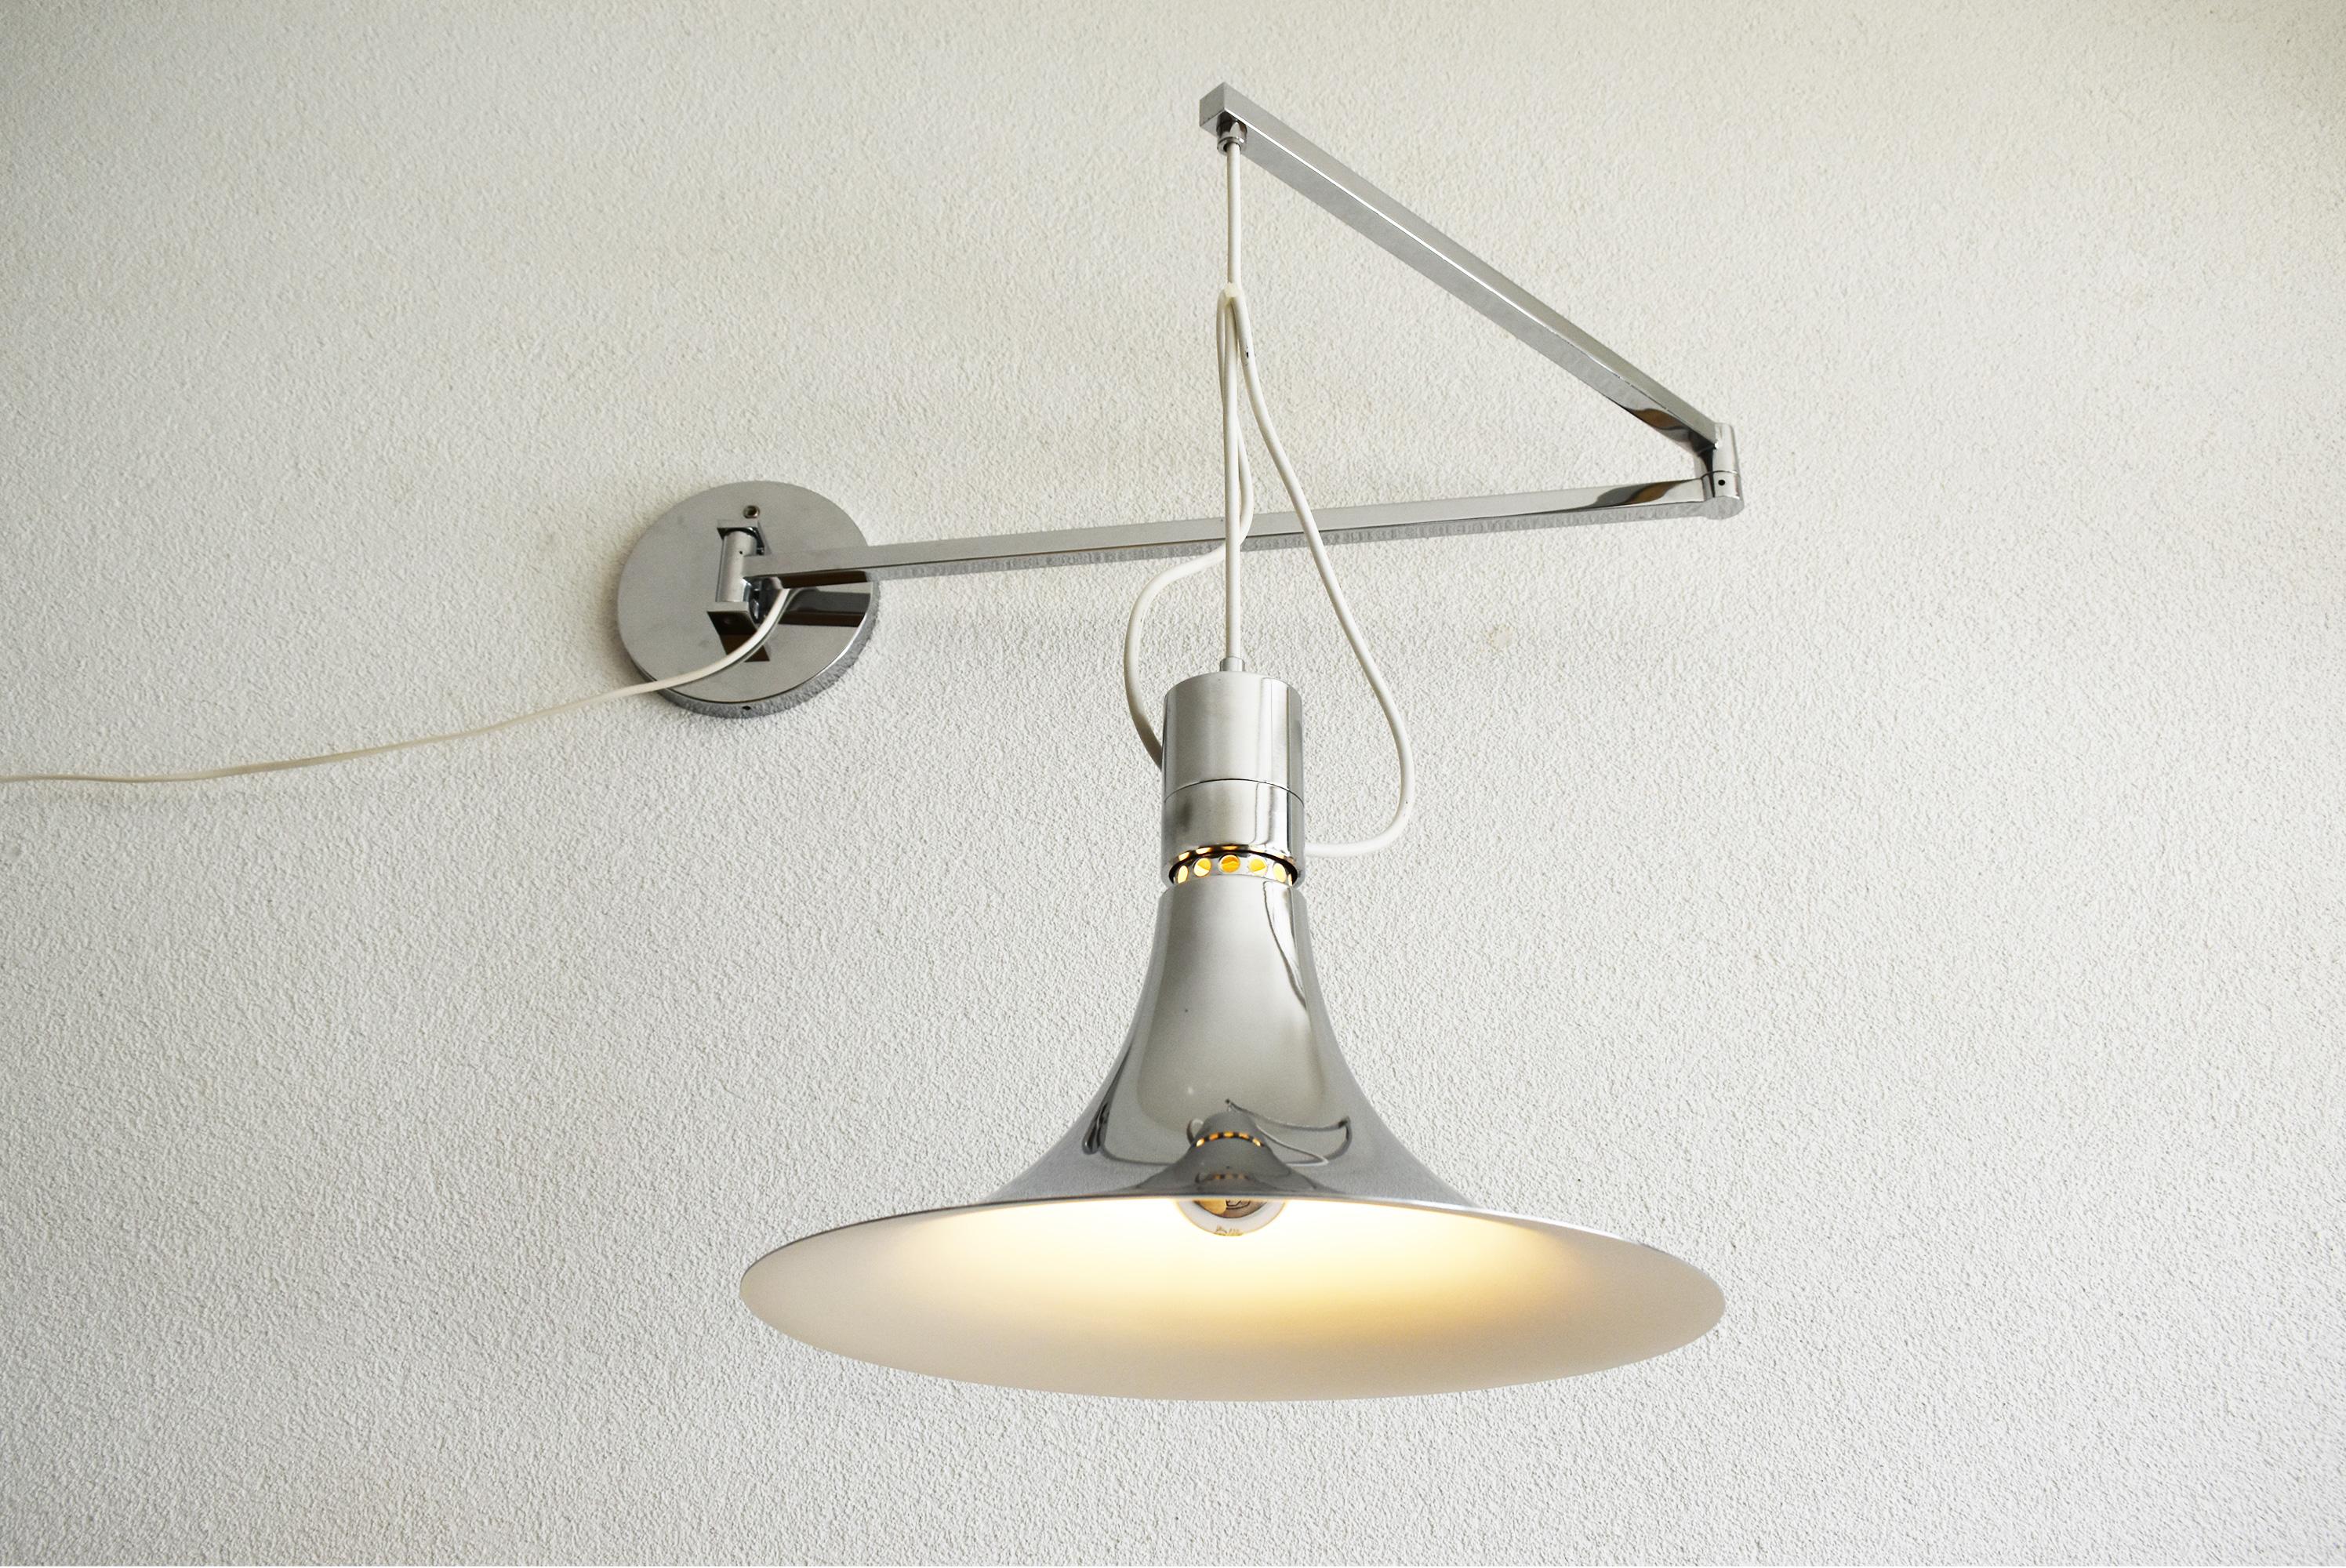 The AM/AS wall lamp with chromed swing arm was designed in Italy by Franca Helg and Franco Albini for Sirrah in 1969. It is in very good condition, complete and ready for immediate use.
What sets this lamp apart is its ingenious swing arm mechanism,